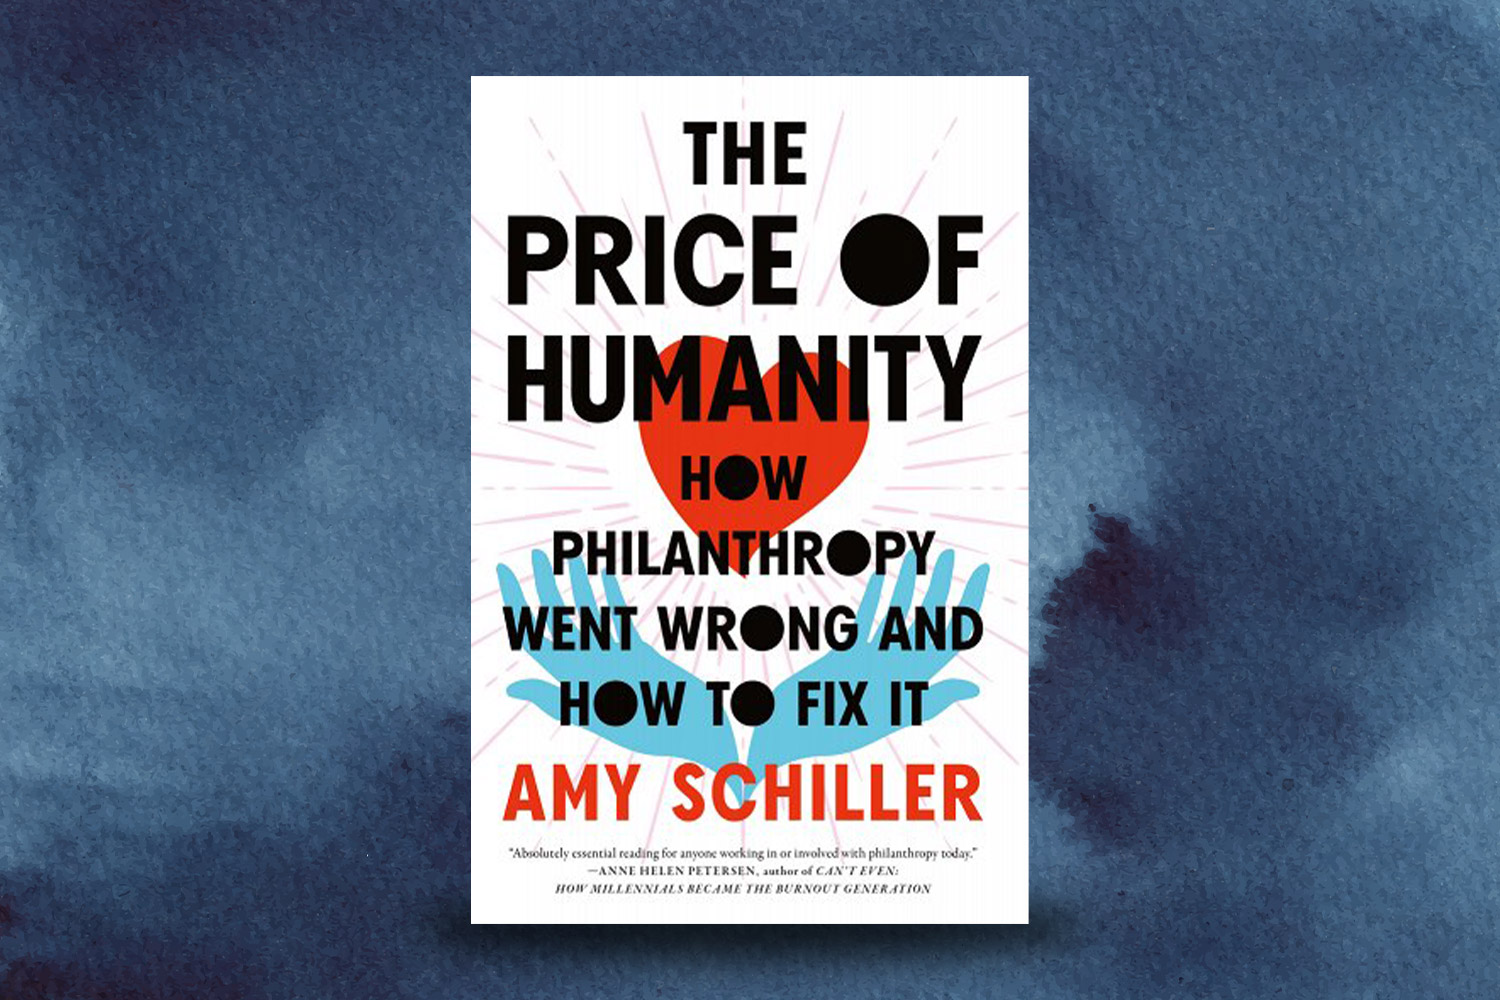 "The Price of Humanity"